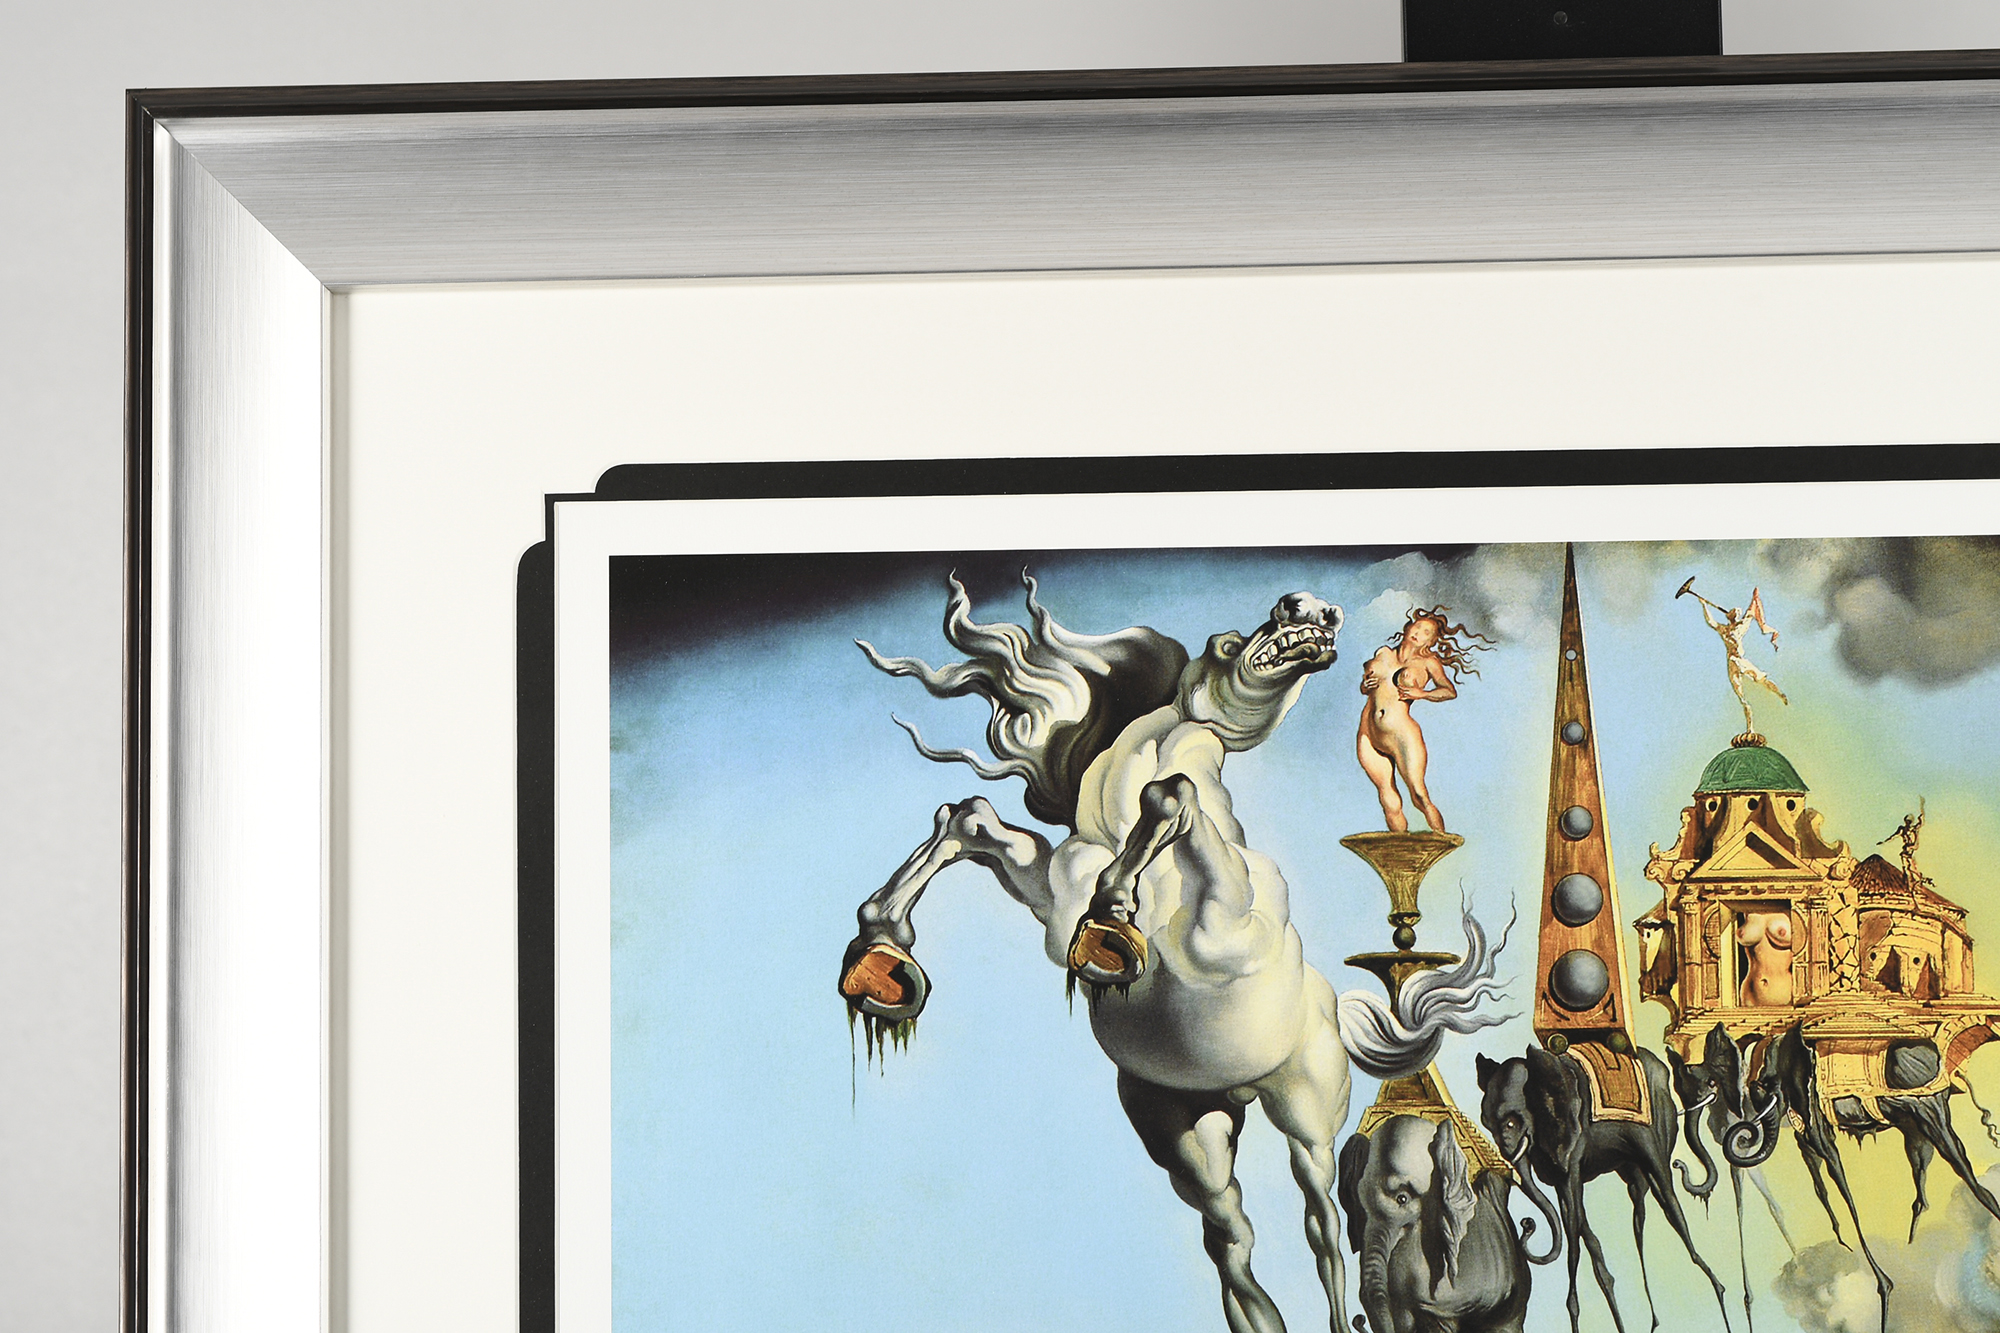 Salvador Dali Limited Edition "The Temptation of St. Anthony, 1942" - Image 3 of 10